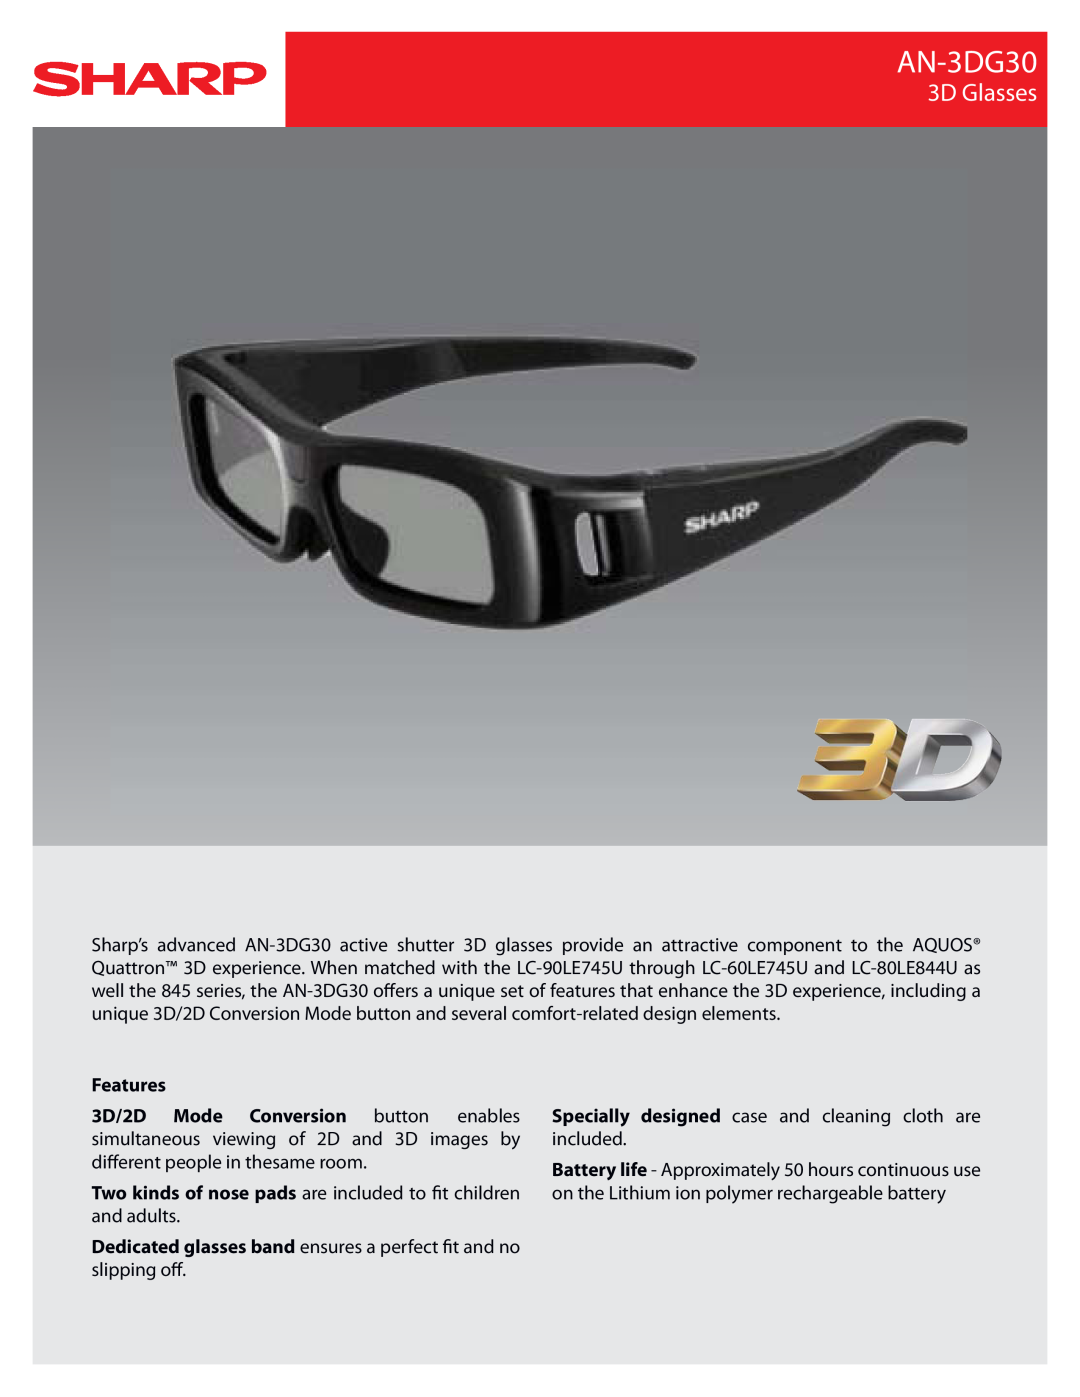 Sharp AN-3DG30, AN3DG30 manual 3D Glasses, Specially designed case and cleaning cloth are included 